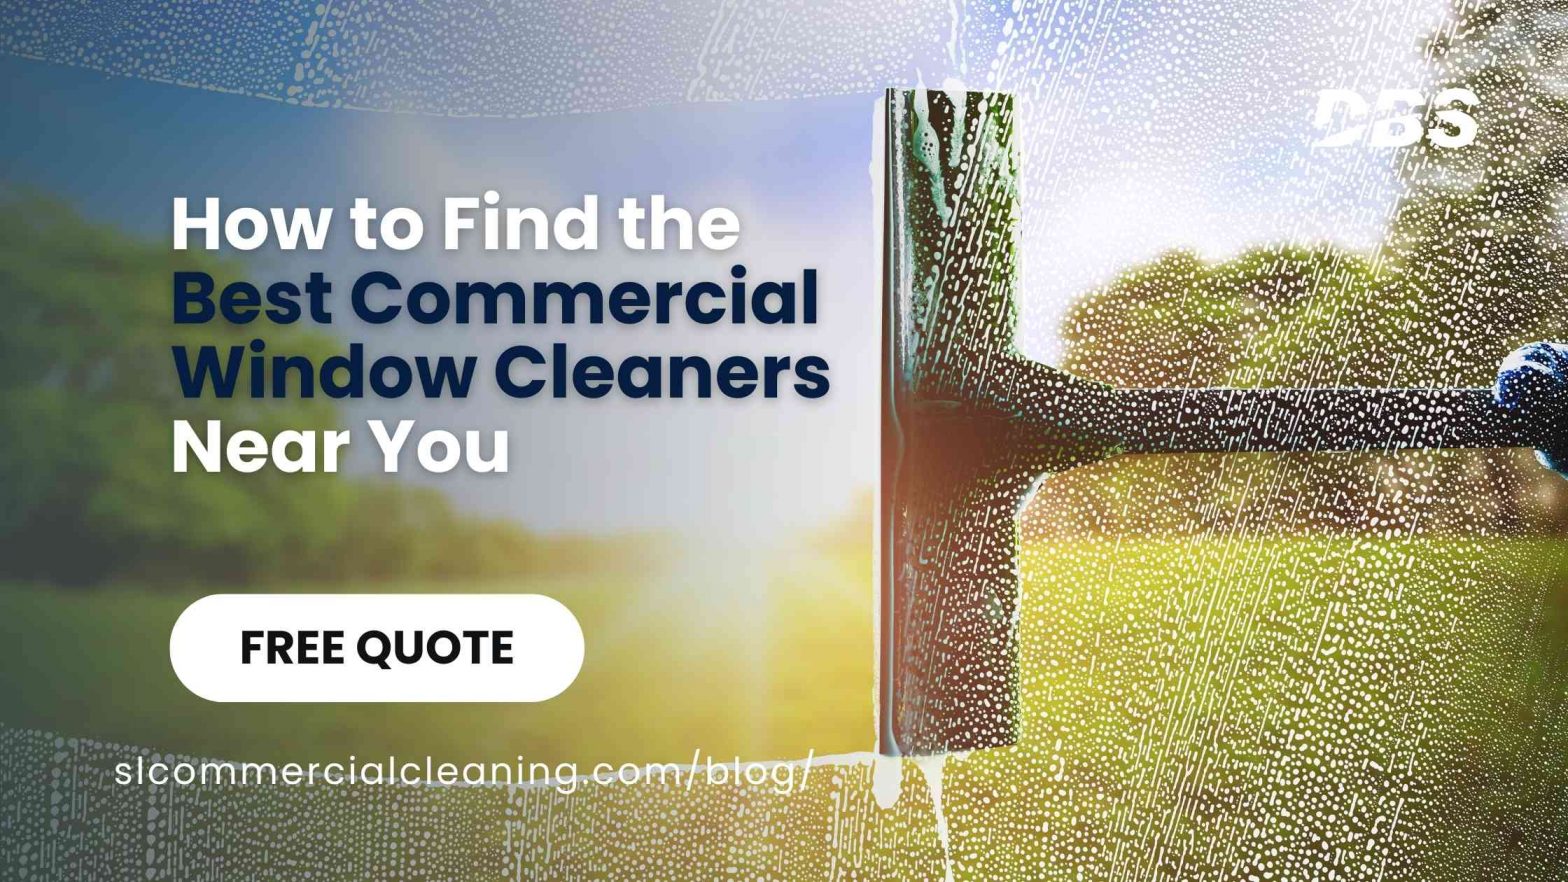 How to Find the Best Commercial Window Cleaners Near You